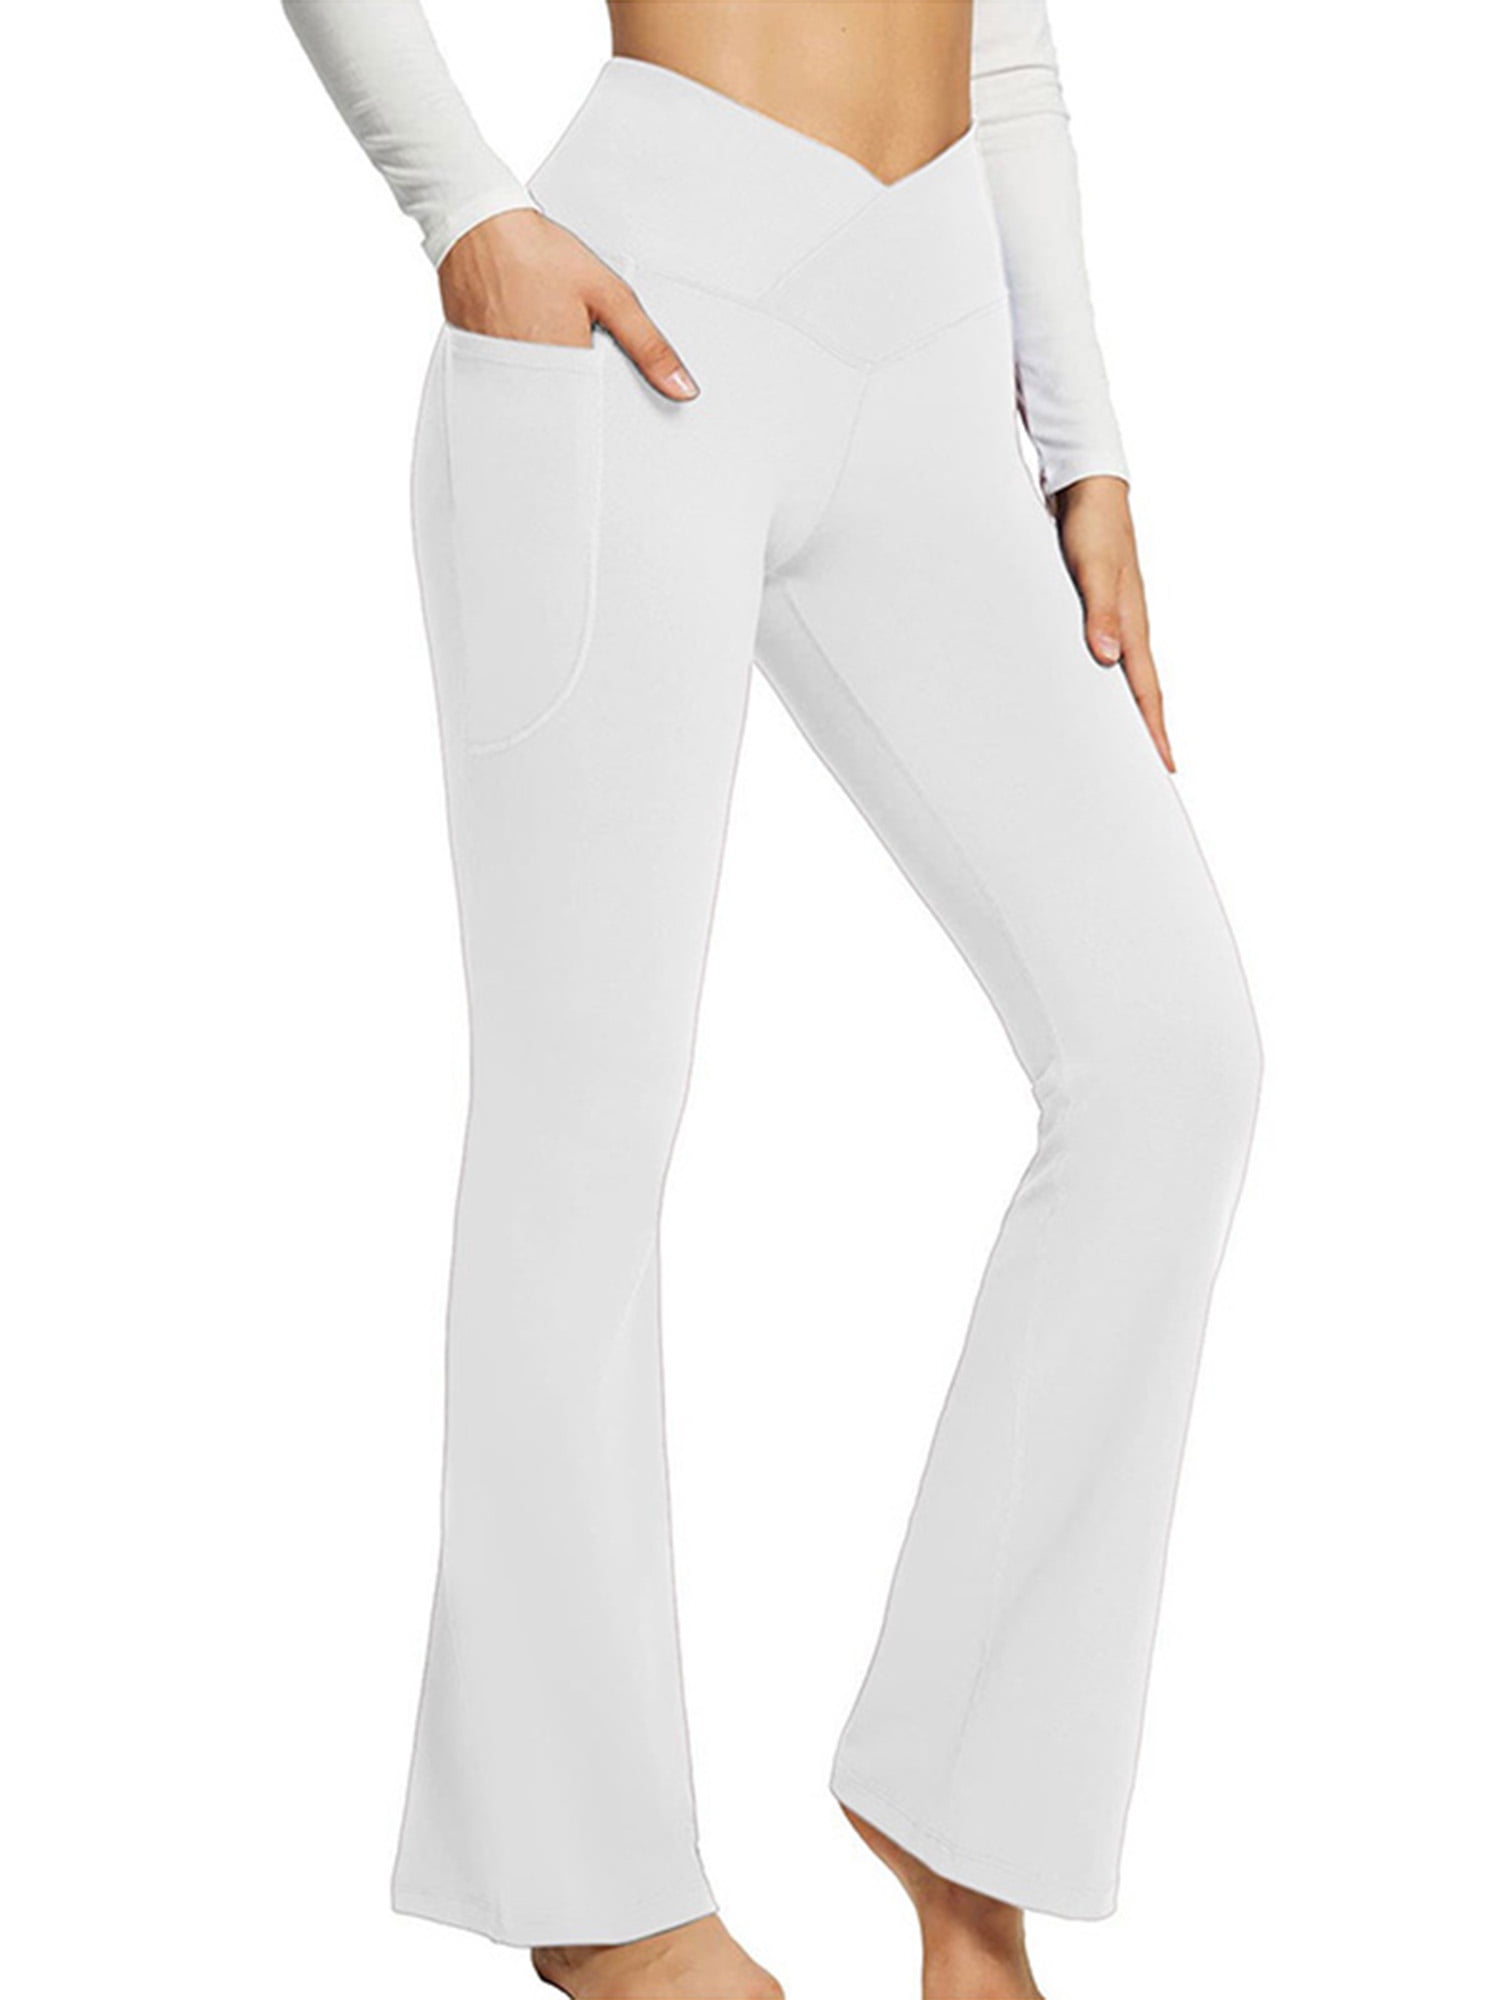 Frontwalk Women's Flare Yoga Pants Crossover High Waisted Casual Bootcut  Leggings White M